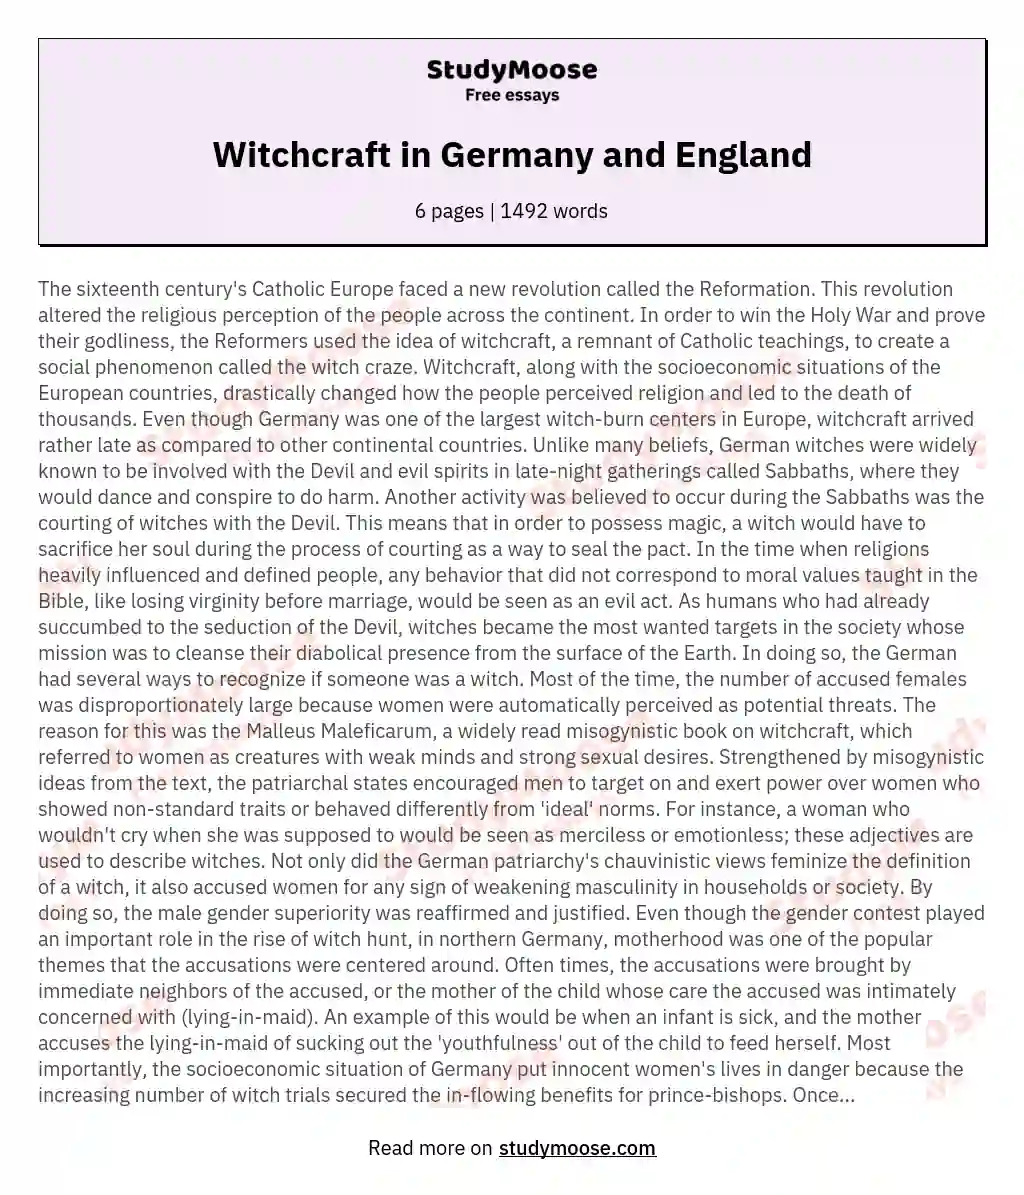 Witchcraft in Germany and England essay